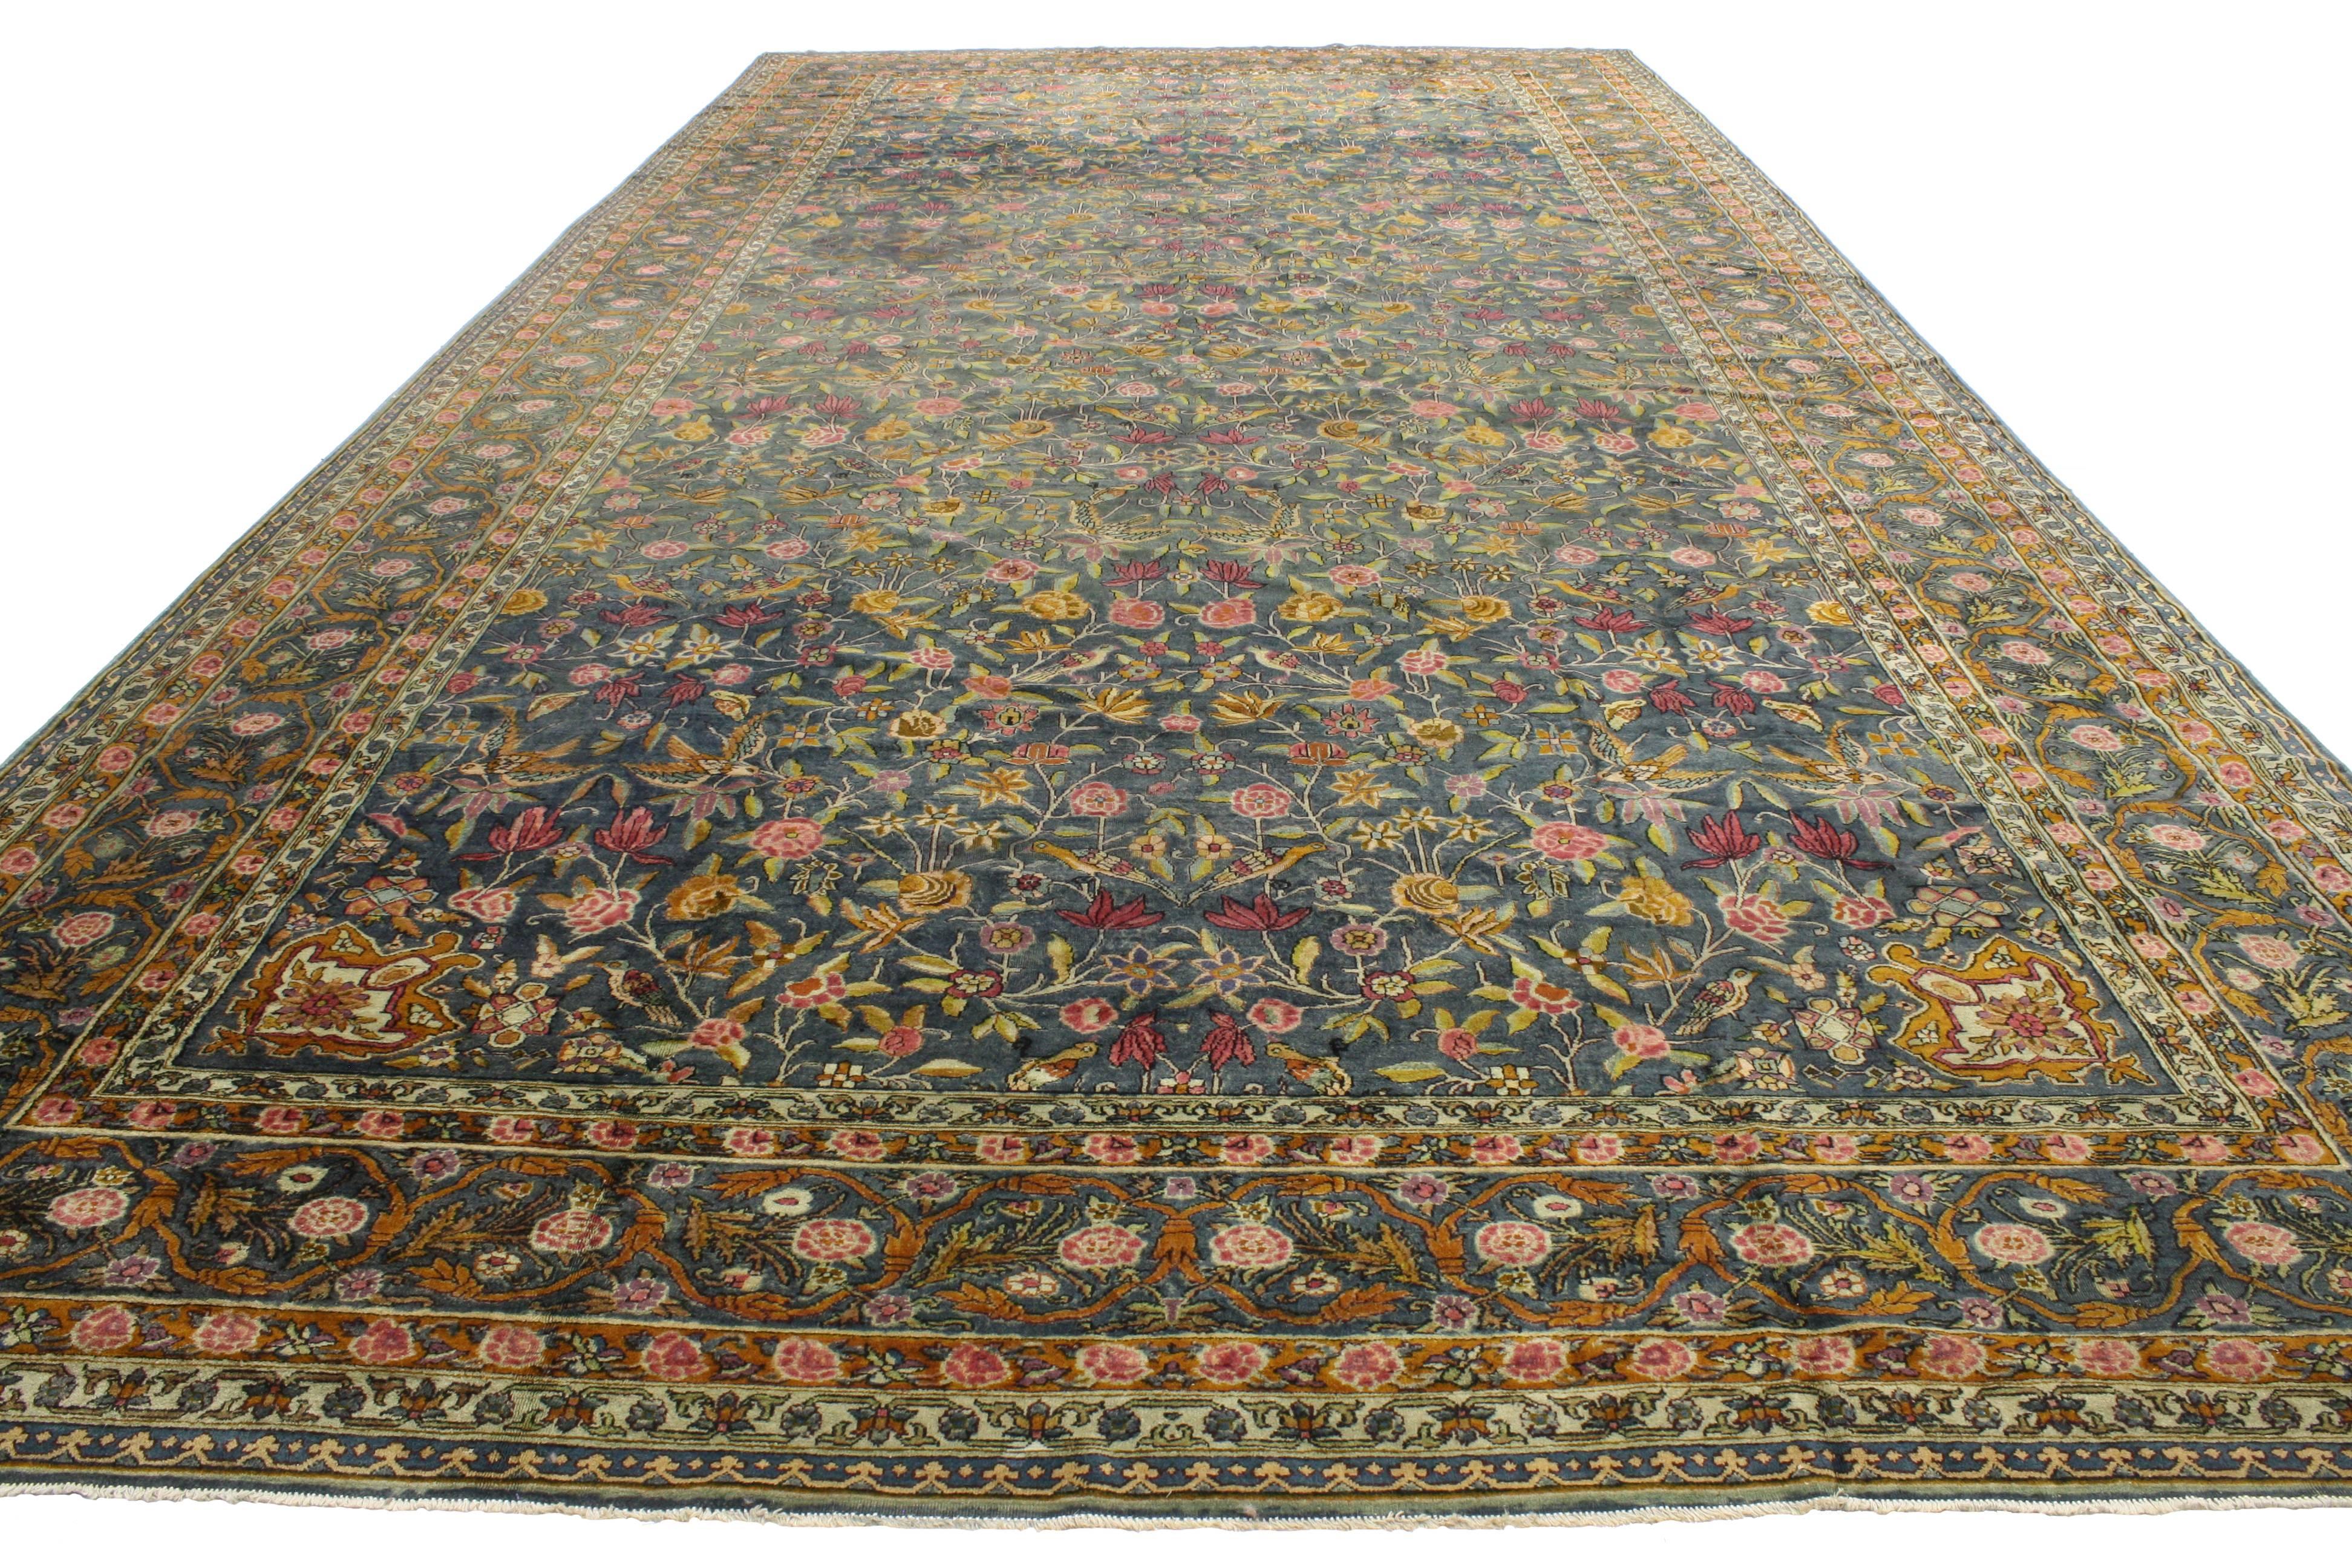 Antique Indian Agra Palace Size Rug with Rococo Regency Style In Good Condition For Sale In Dallas, TX